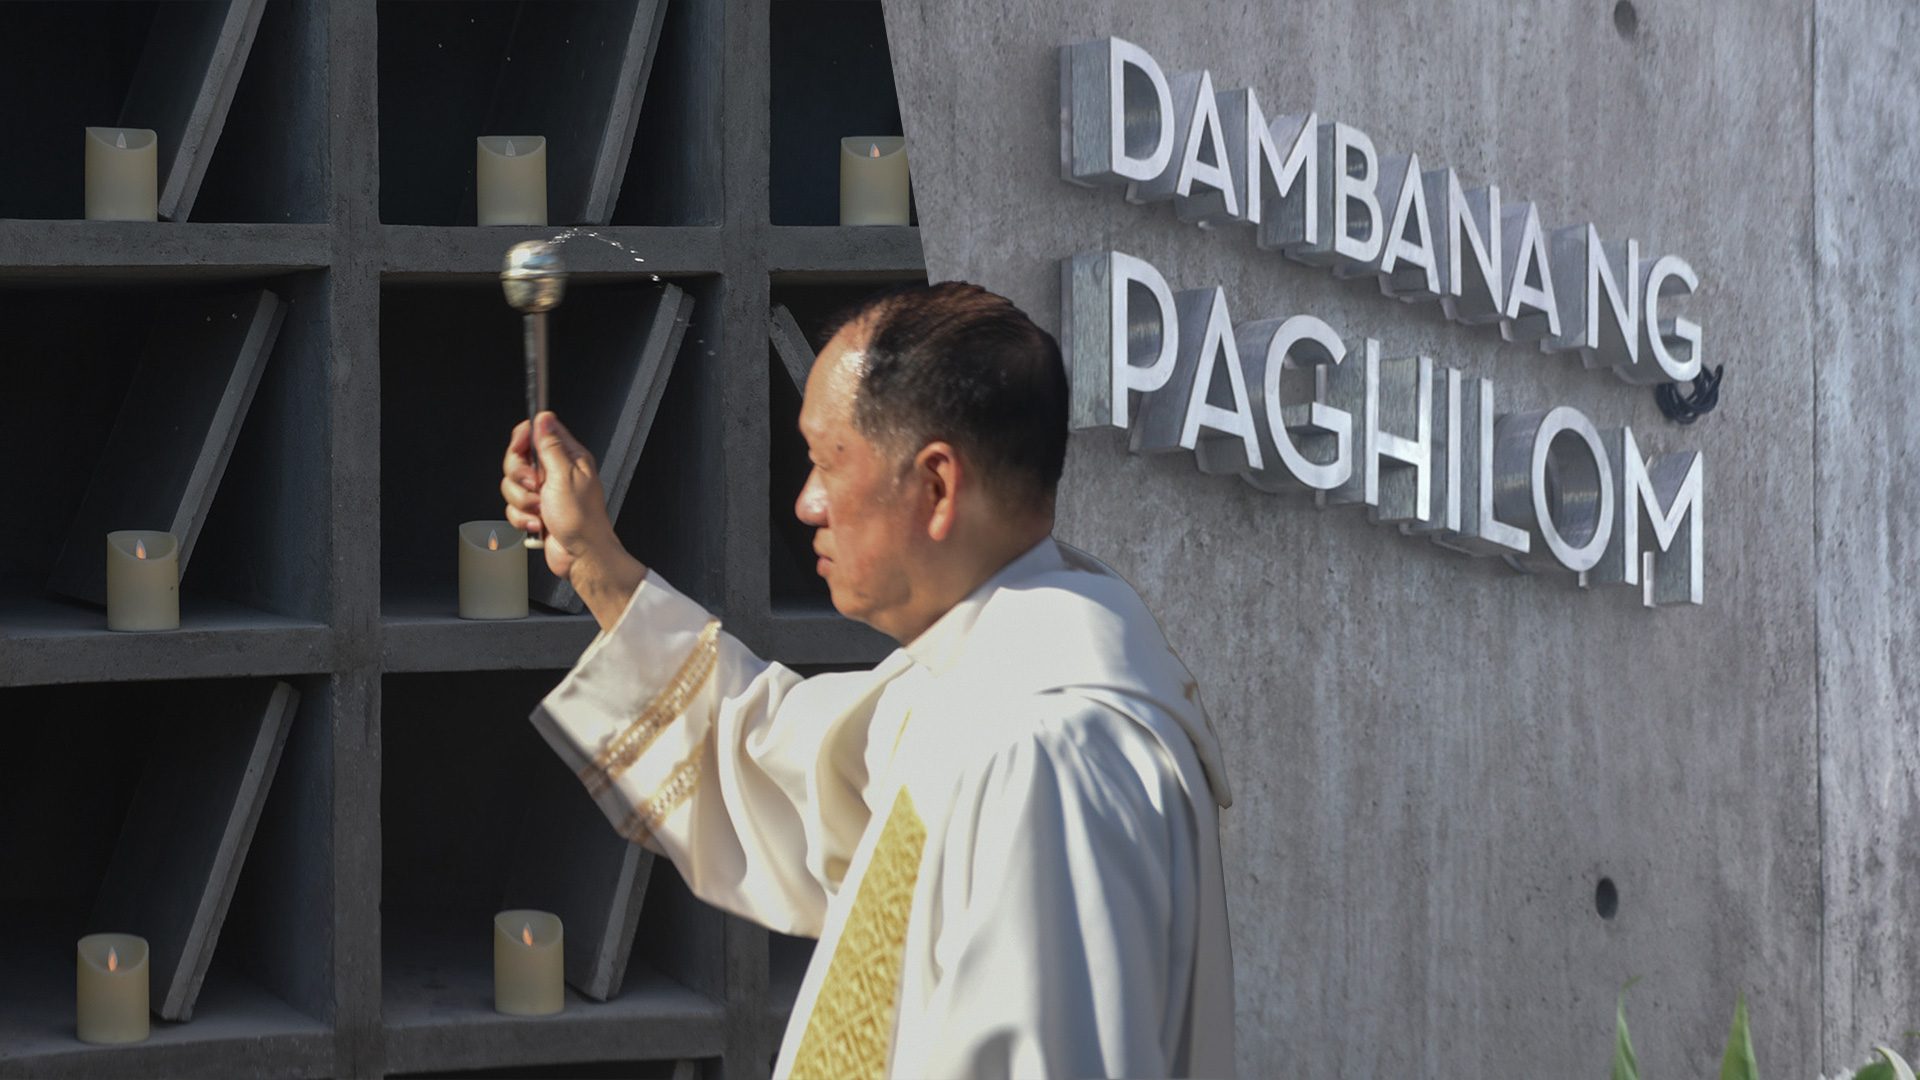 In hot spot of drug war deaths, victims are immortalized through a shrine